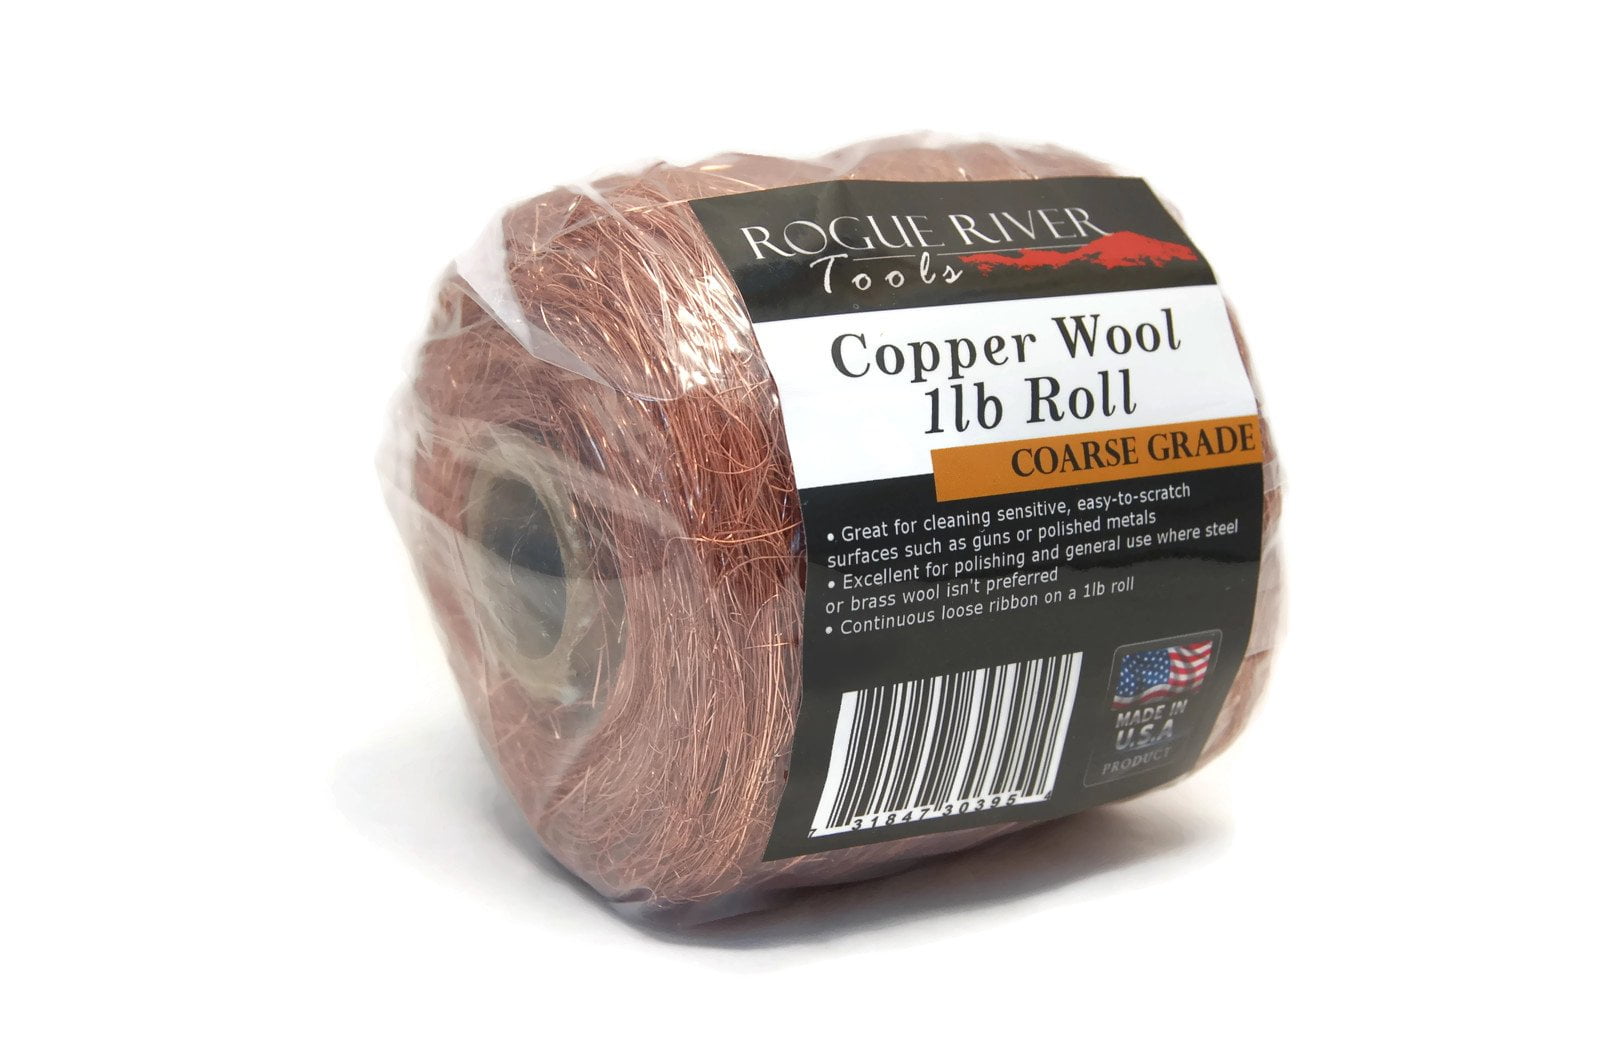 Medium Grade Rogue River Tools Stainless Steel Wool 1lb Roll Made in USA! 